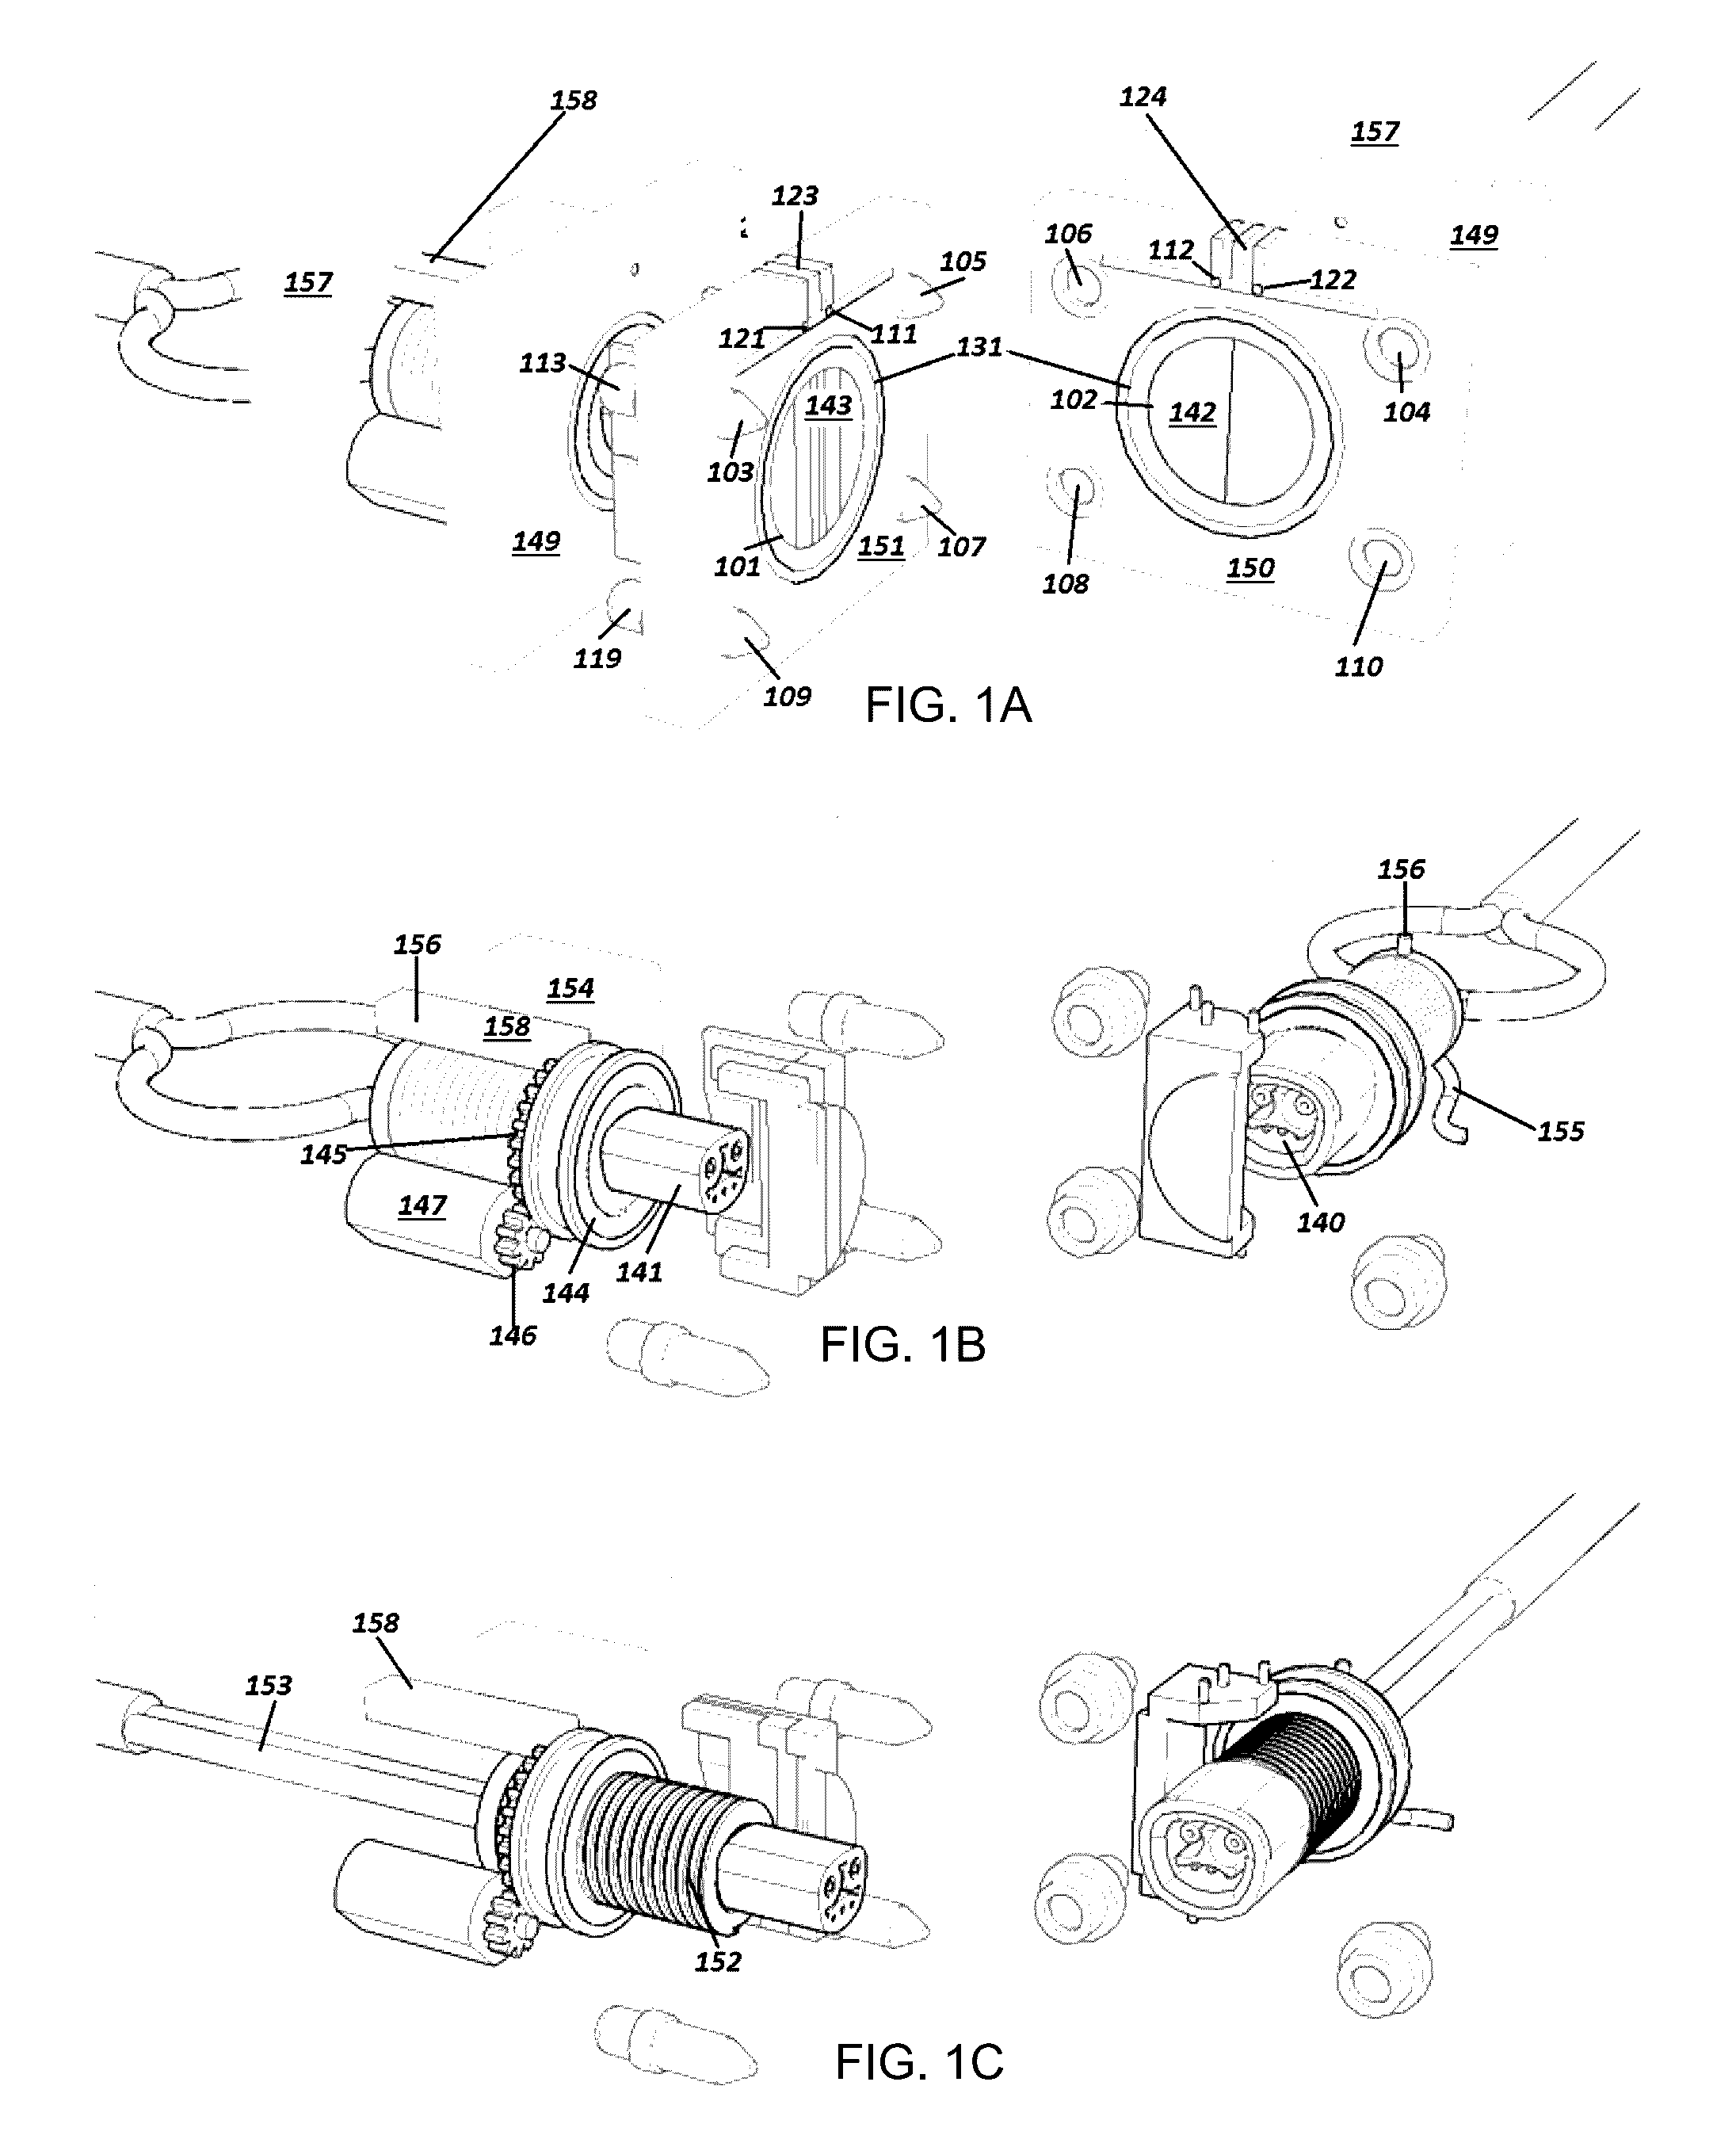 Transportation system of combined vehicles multi-coupled at highway speeds for electrical energy transfer and sharing